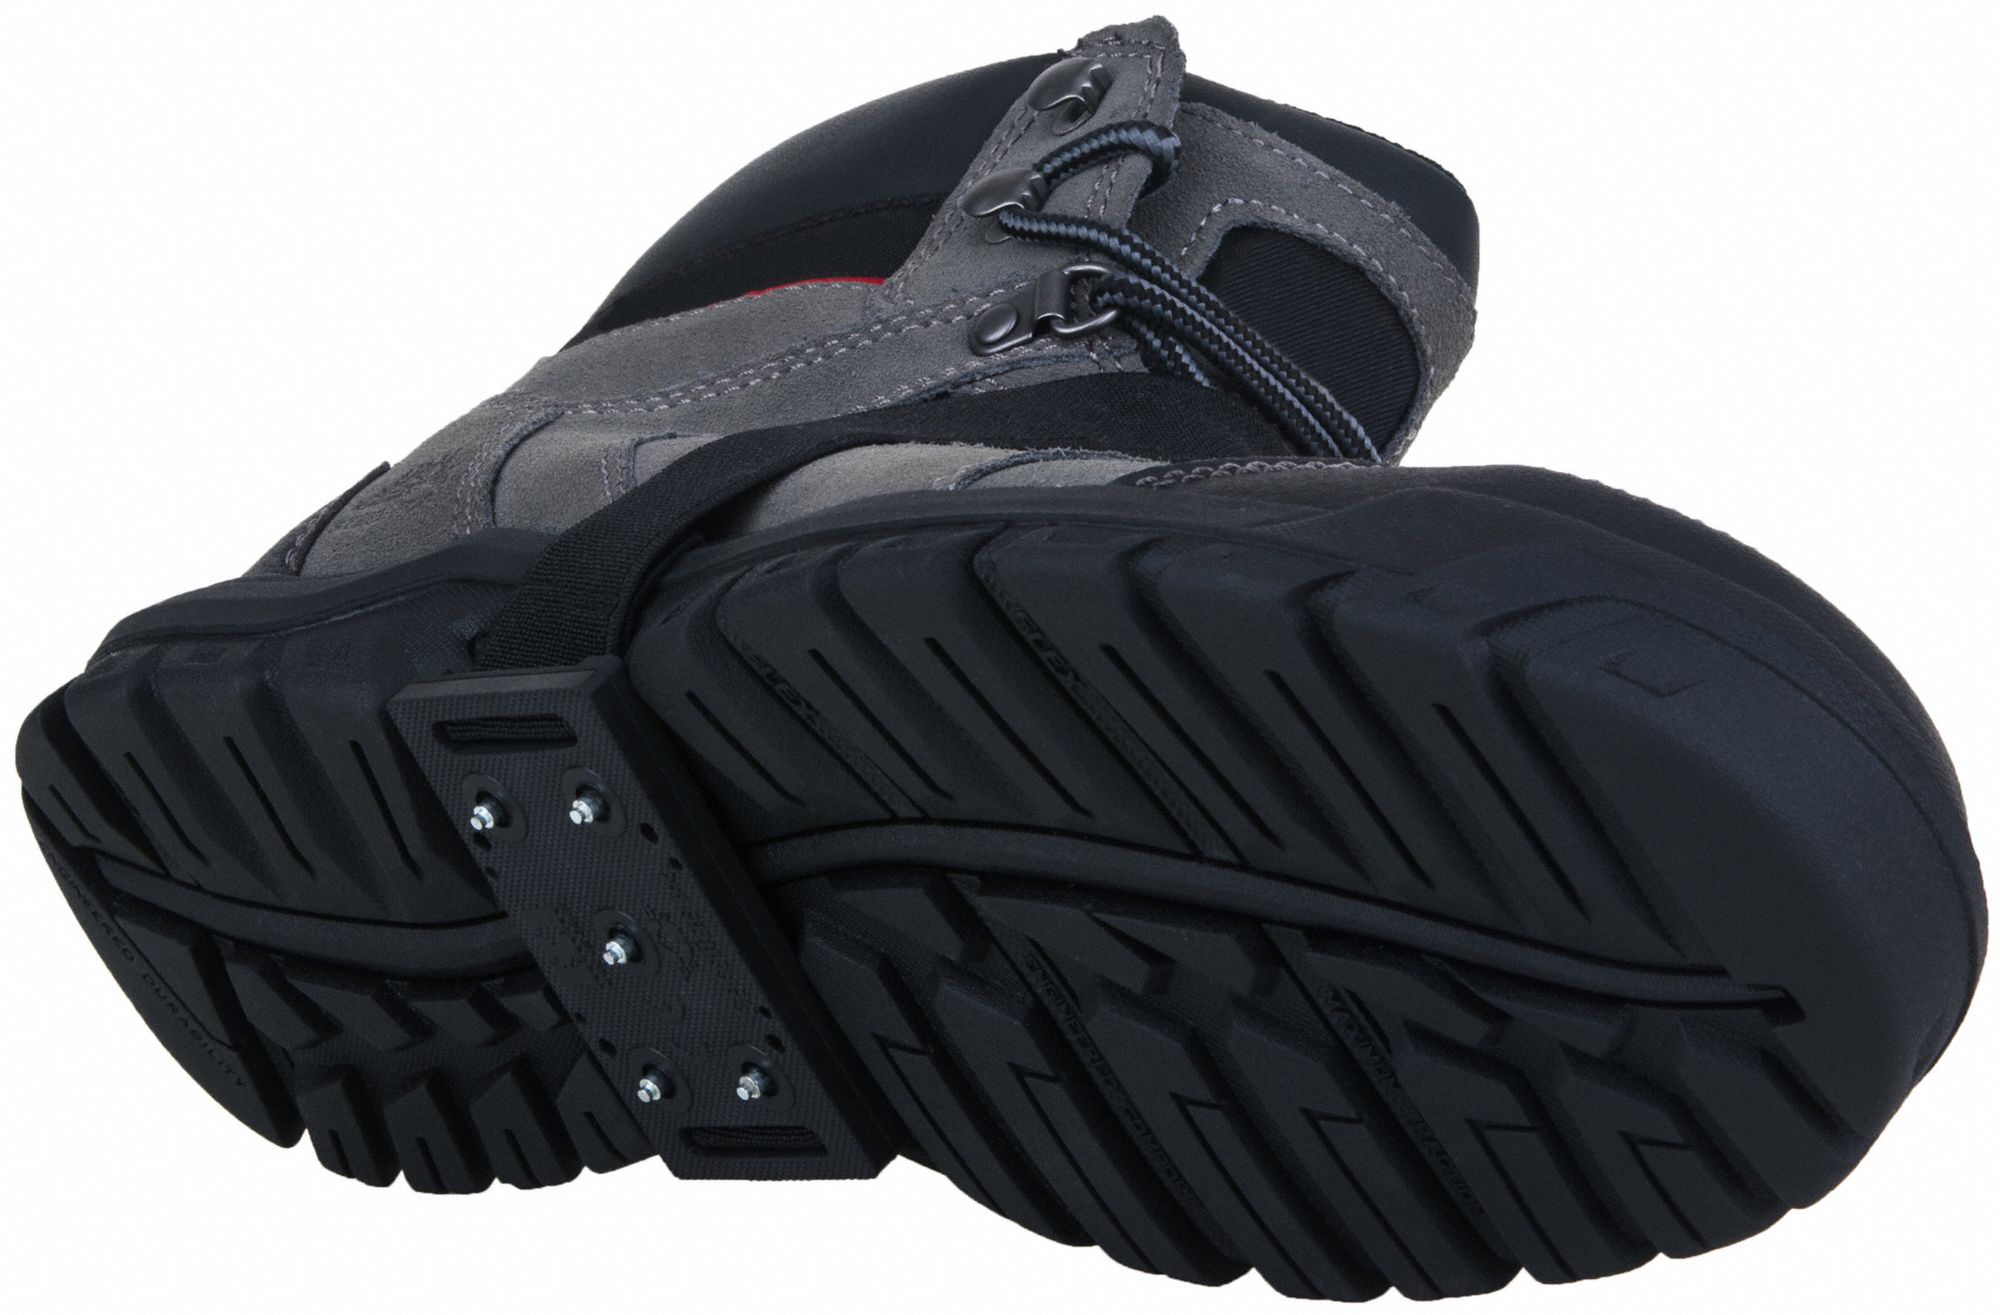 Traction Device: Mid-Sole Footwear Coverage, Rubber, Stud, 3-1/16 in L x 1-3/4 in W x 1/2 in H, 1 PR